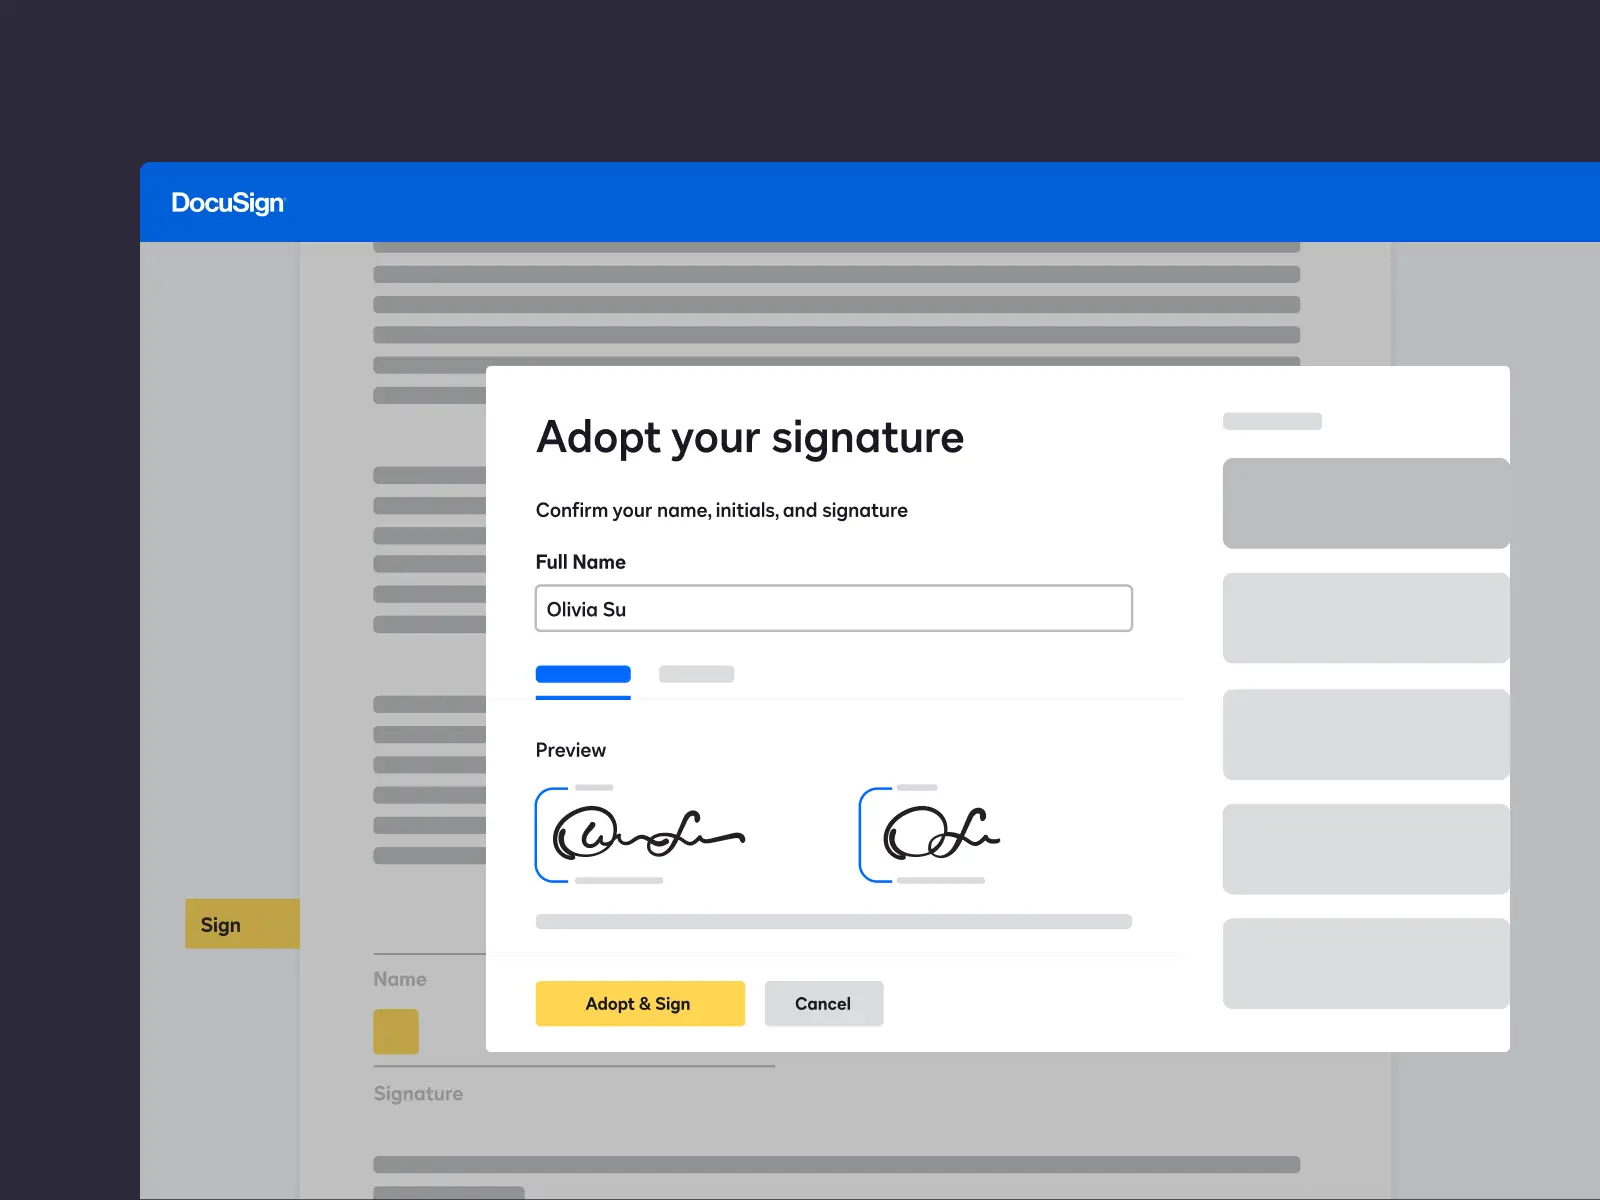 Document in DocuSign with a prompt for the user to confirm their electronic signature.